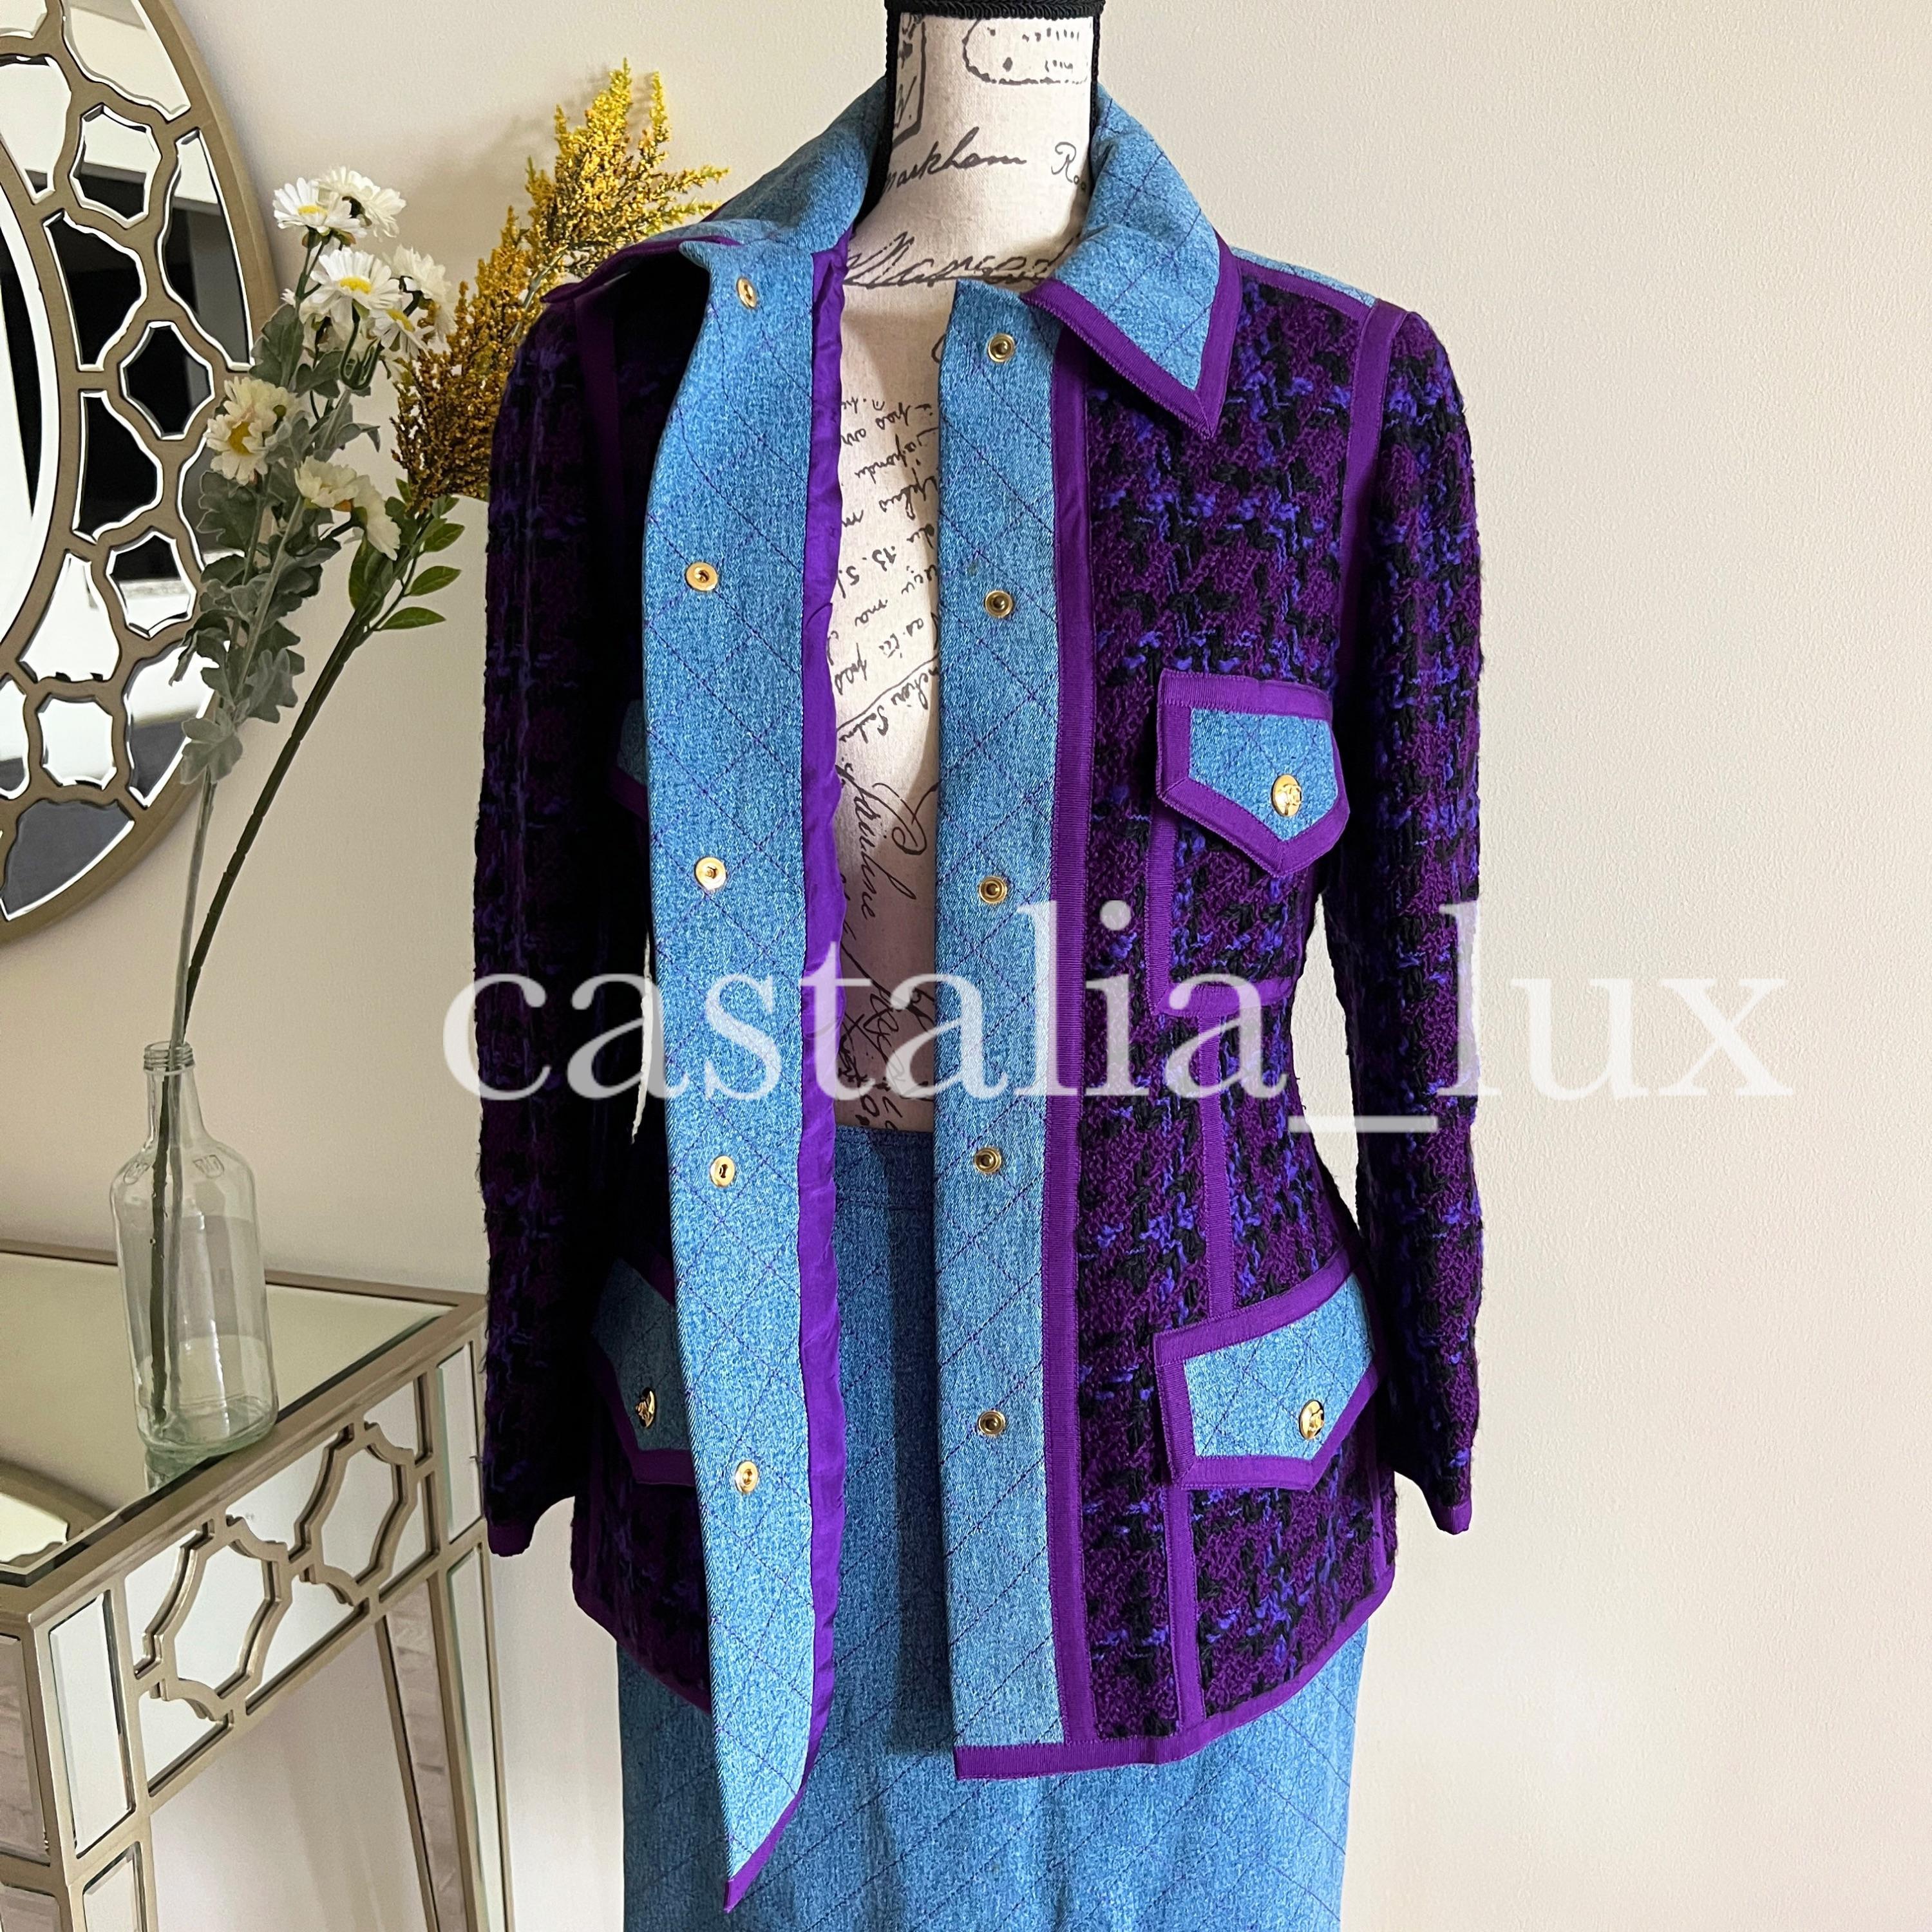 Chanel Rare 1991 Supermodels Tweed and Denim Suit For Sale 7